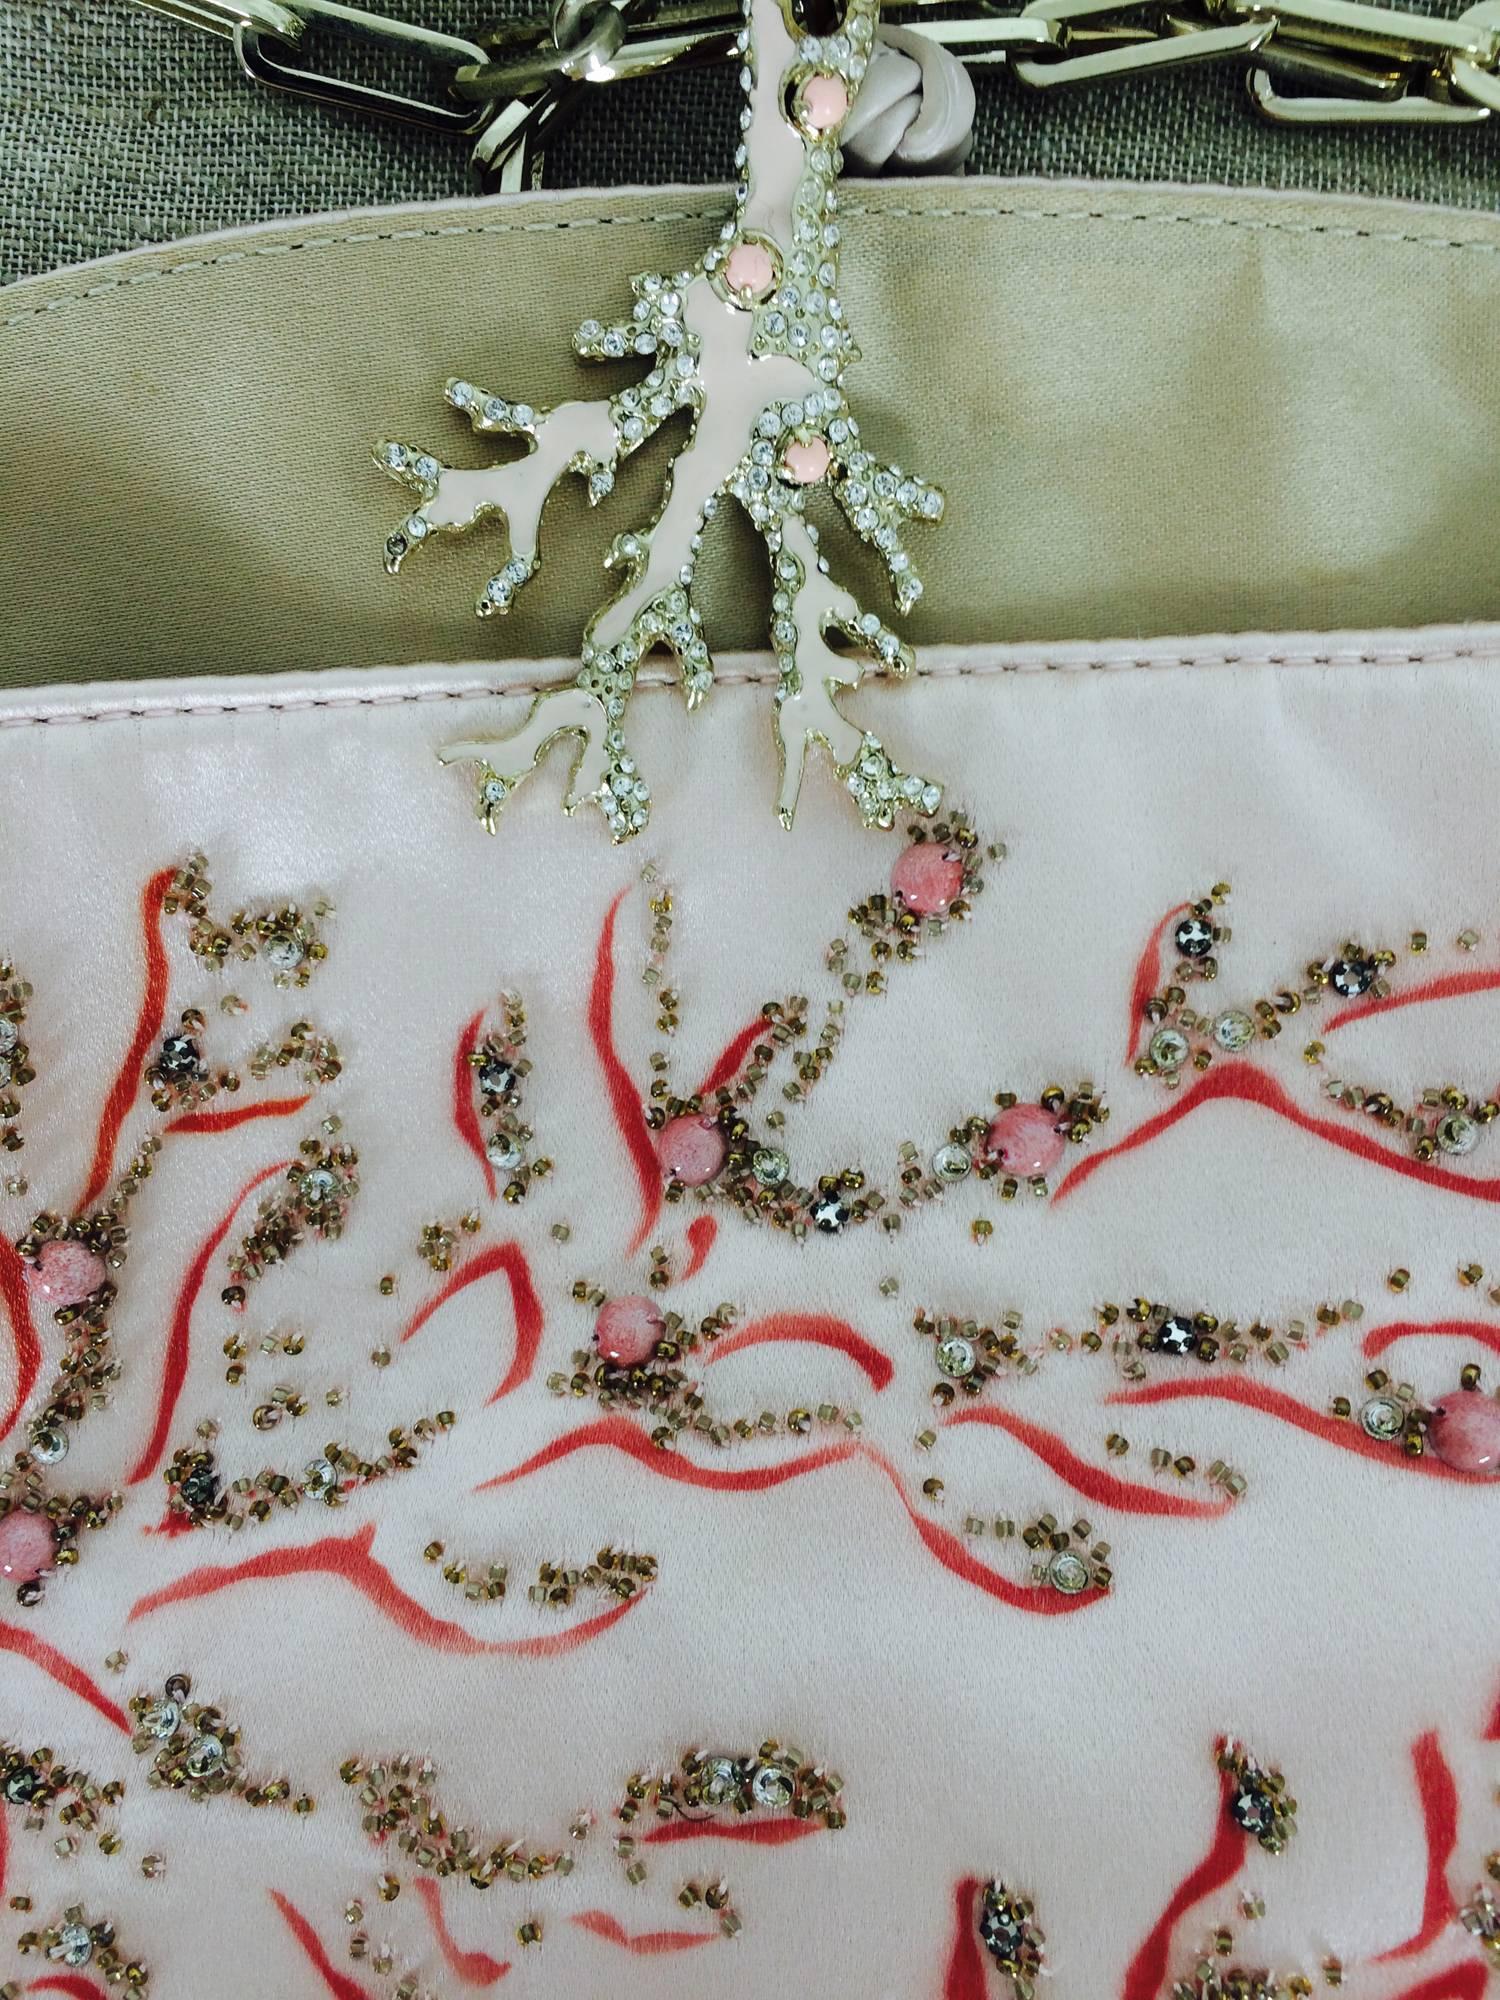 Valentino Garavani hand painted and beaded coral jewel evening bag...Pale pink silk satin bag is decorated at the front in a coral design done in crystal beads and coral beads, with hand painting...The bottom of the bag is gold leather...Lined in